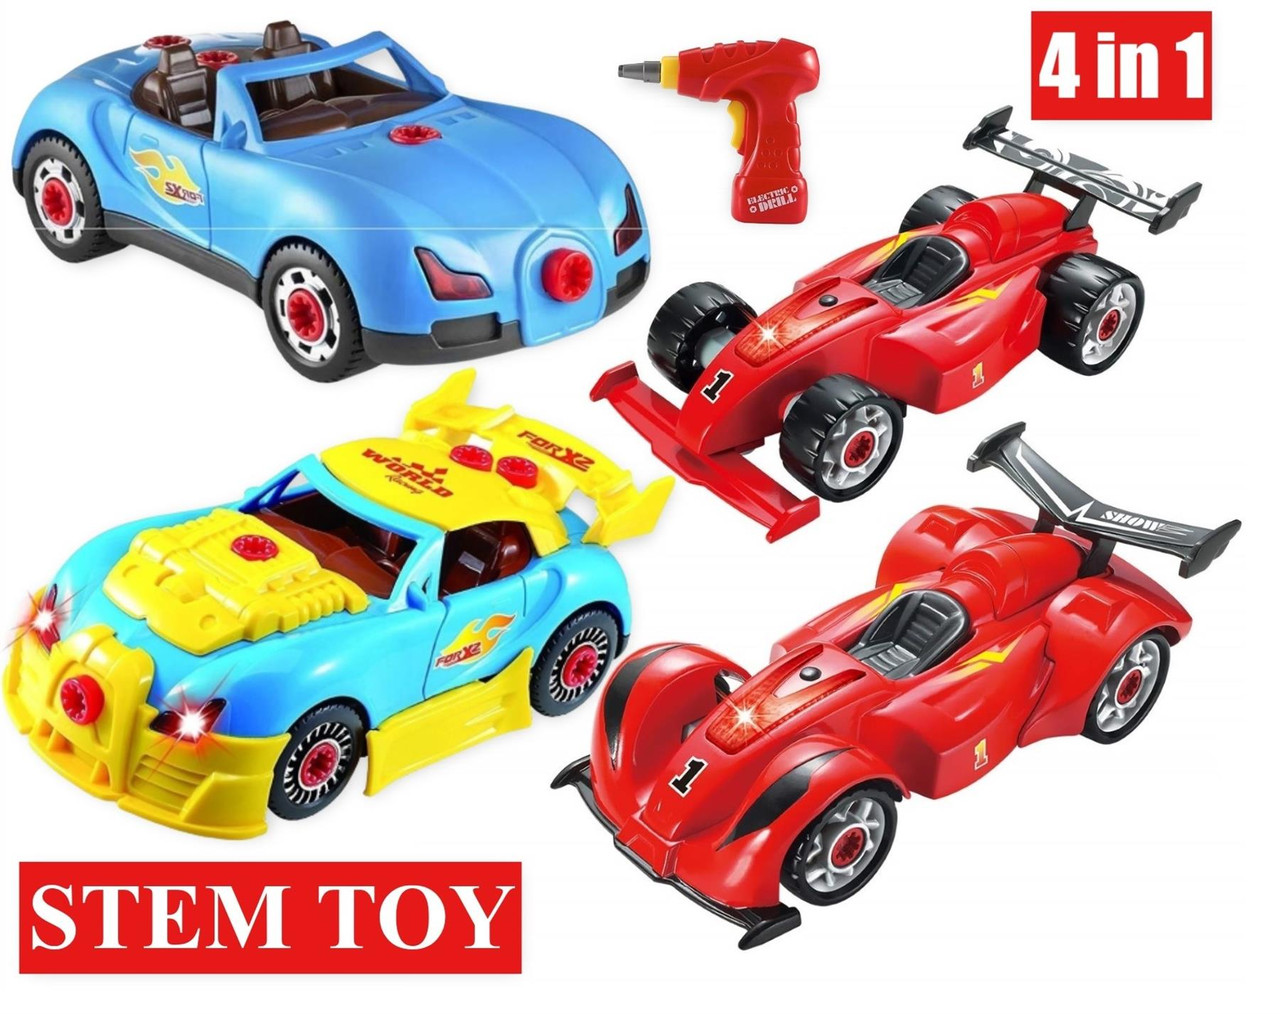 Soka 4 In 1 Sports Racing Car Stem Toy Set 54 Take Apart Pieces Build Your Own Car Toy For Kids With Tool Drill Lights And Sounds Vinsani Ltd